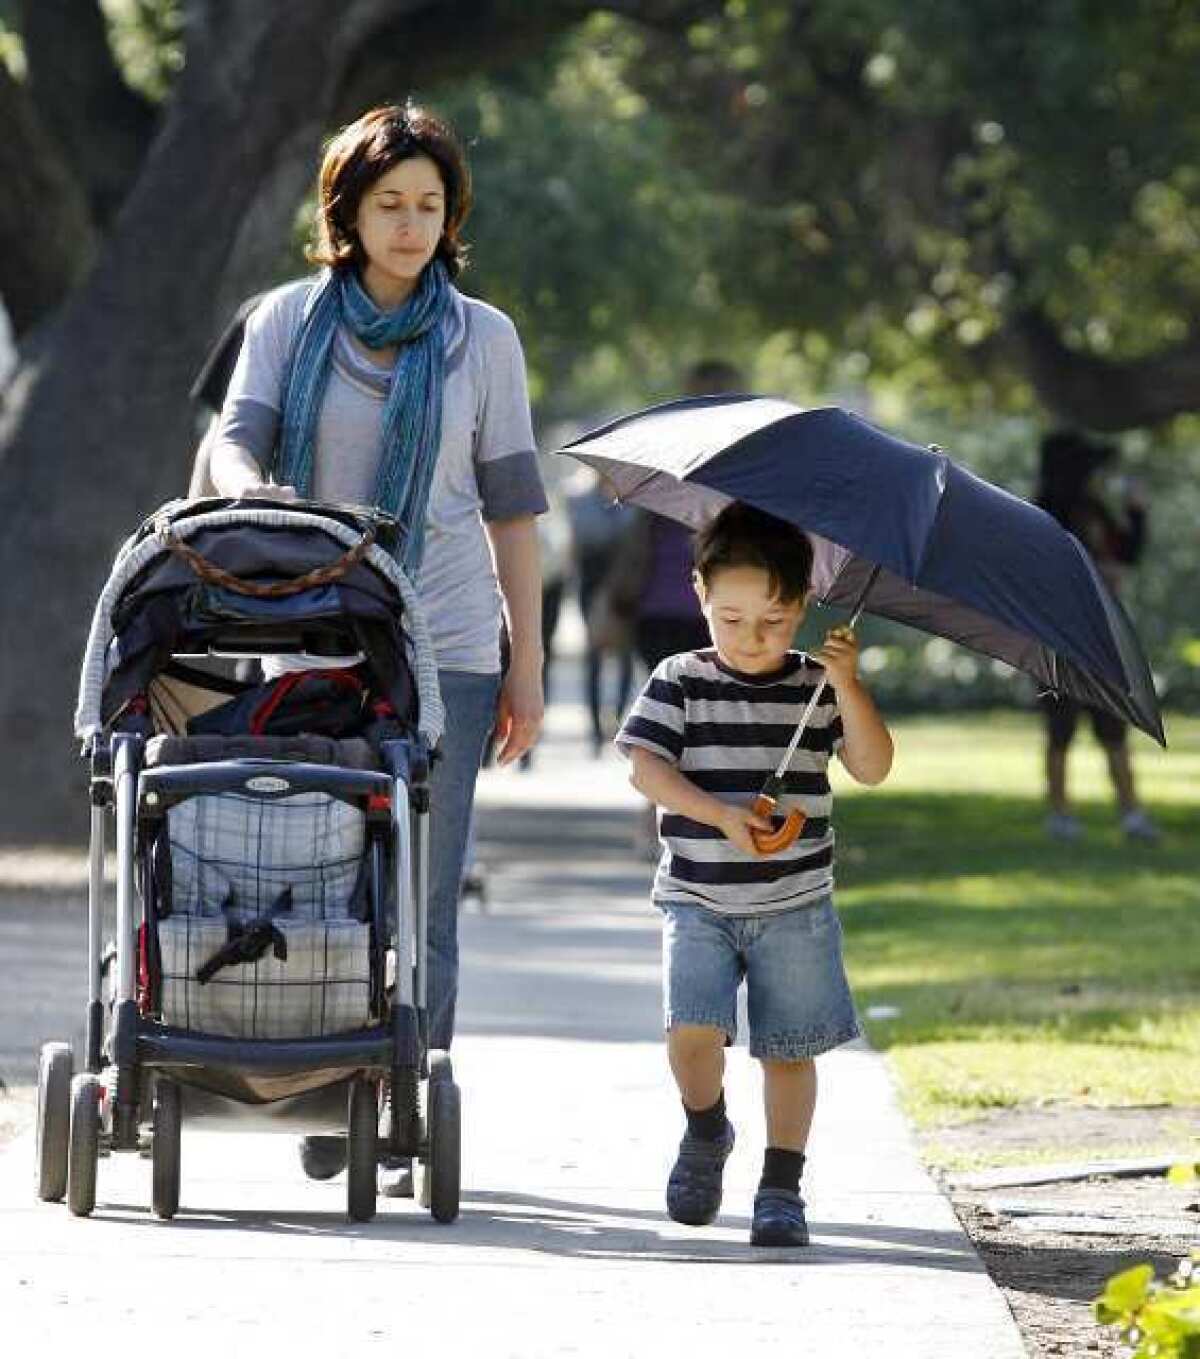 Edgar Galstyan, 3, holds an umbrella, partly to keep from the sun, but more for play, as he walks home with his mom Lusine Tsaturyan after making the morning drop off of a sibling at R.D. White Elementary School in Glendale.